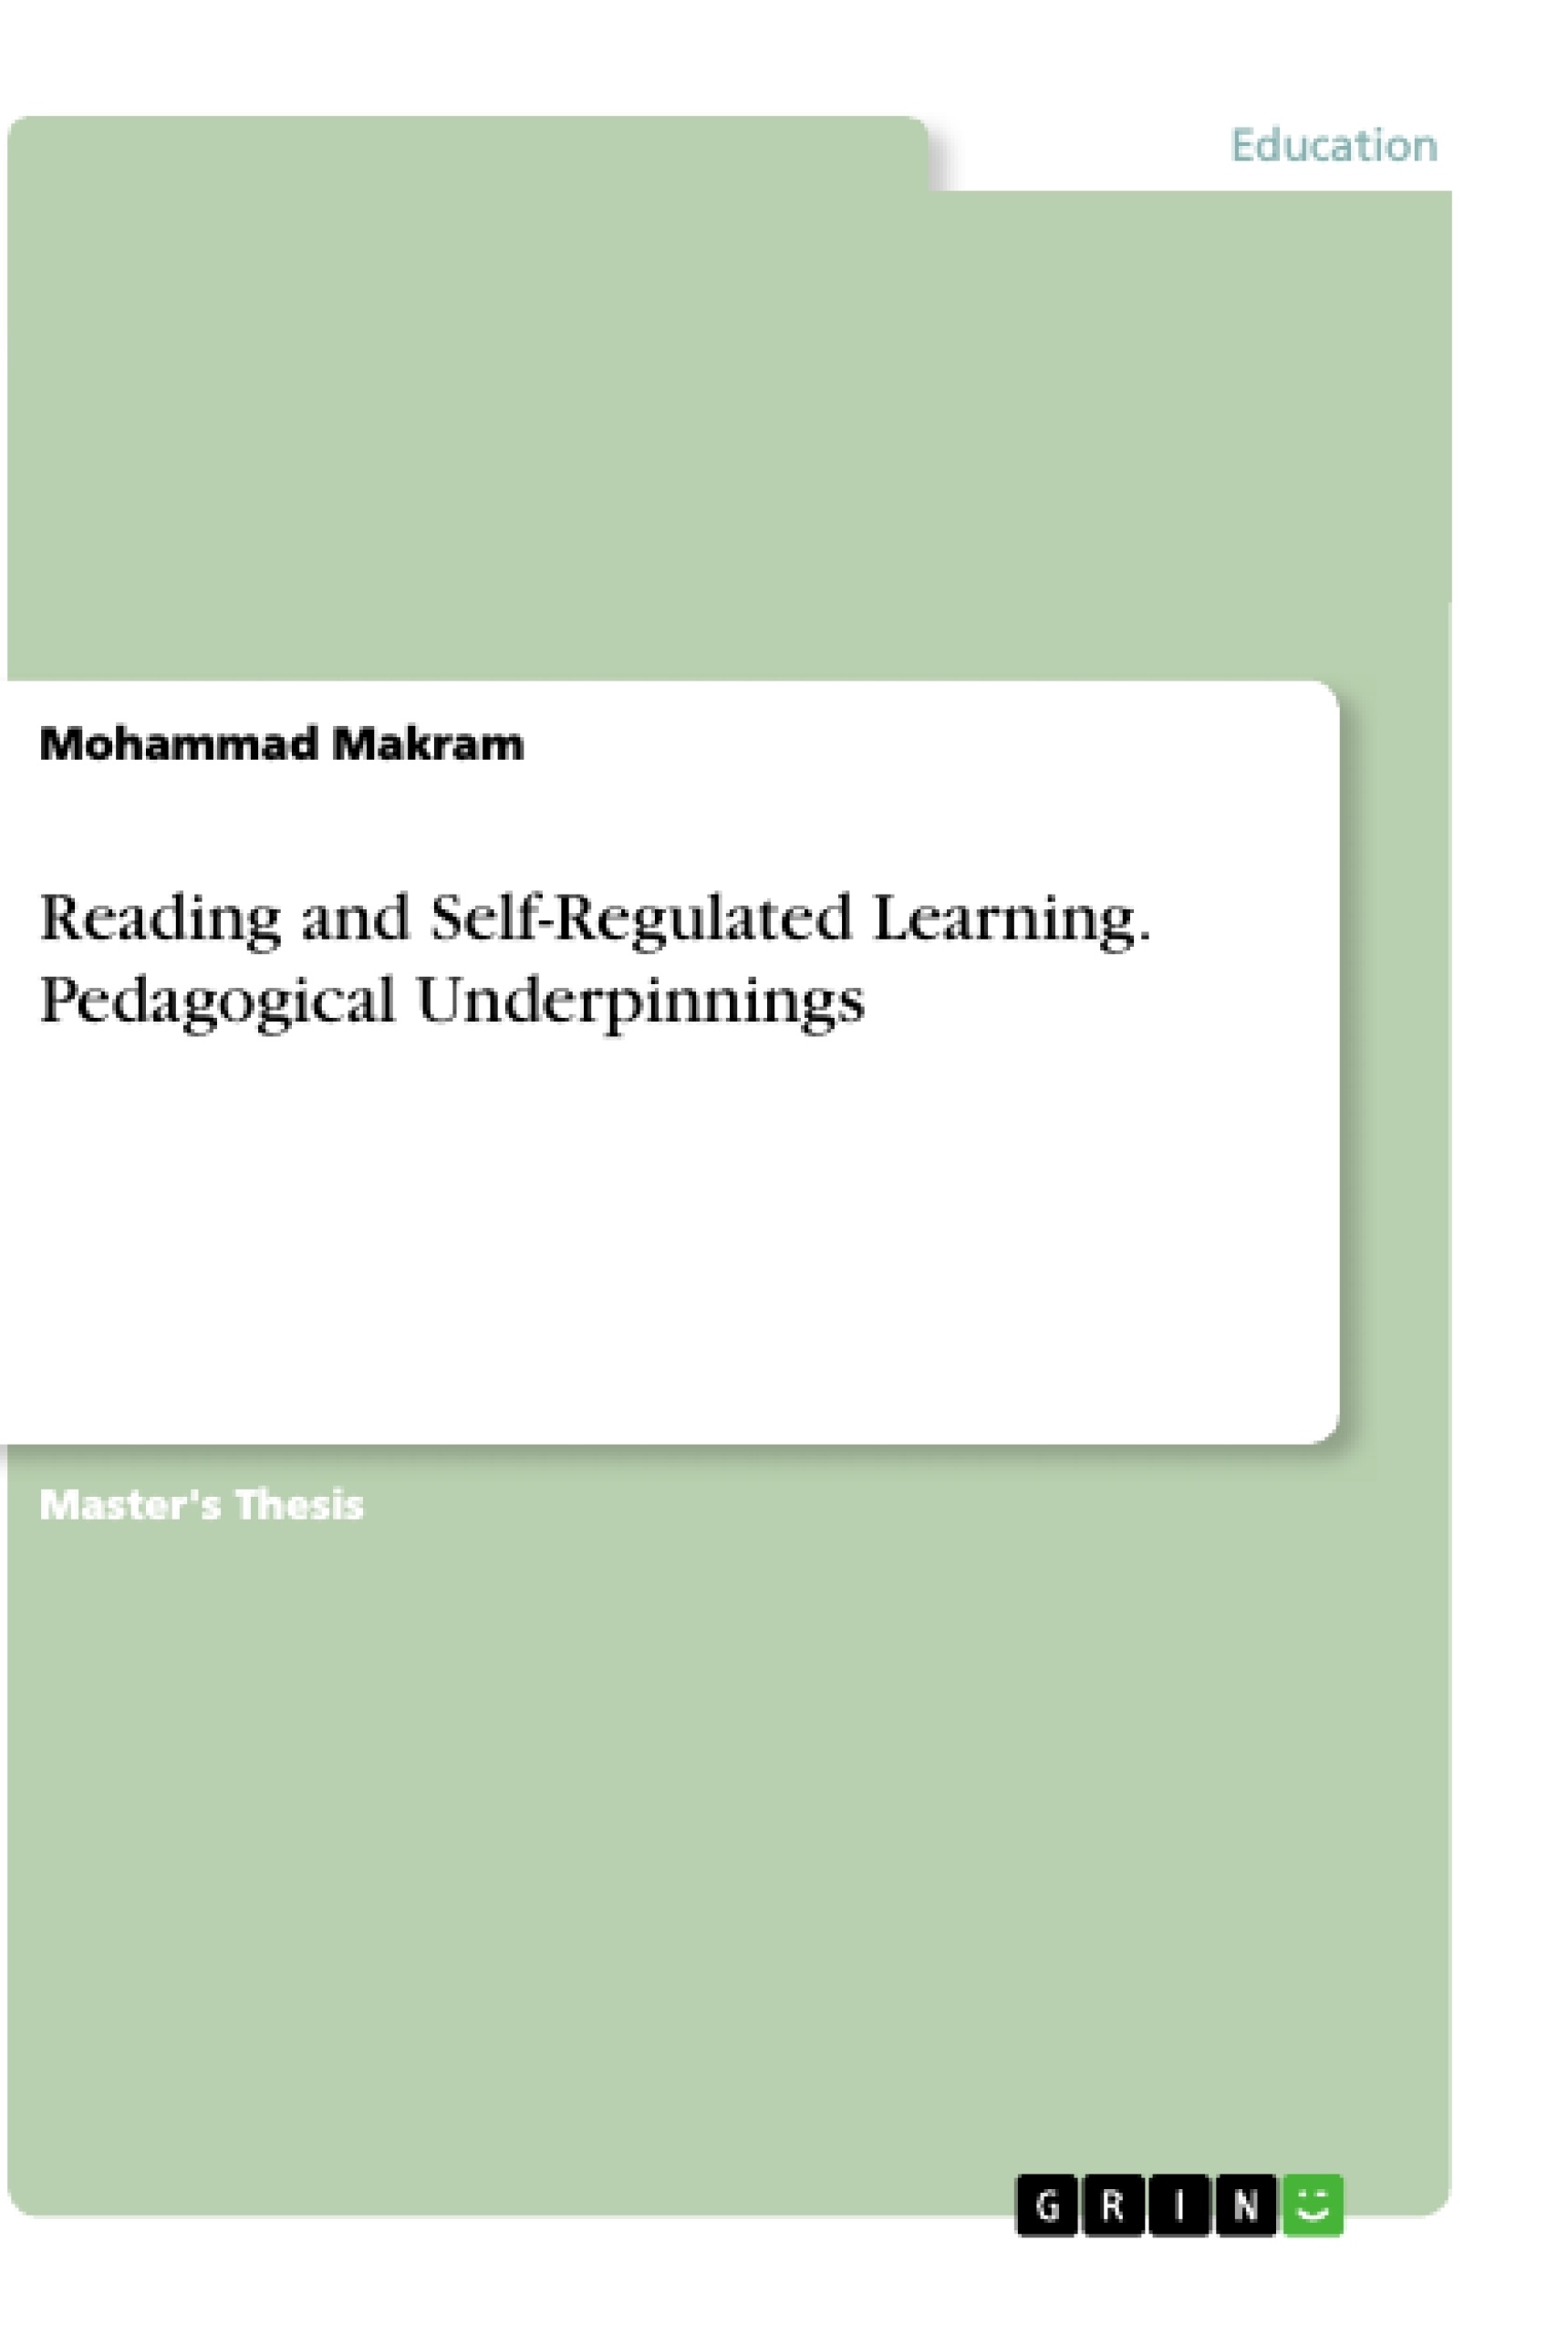 Title: Reading and Self-Regulated Learning. Pedagogical Underpinnings